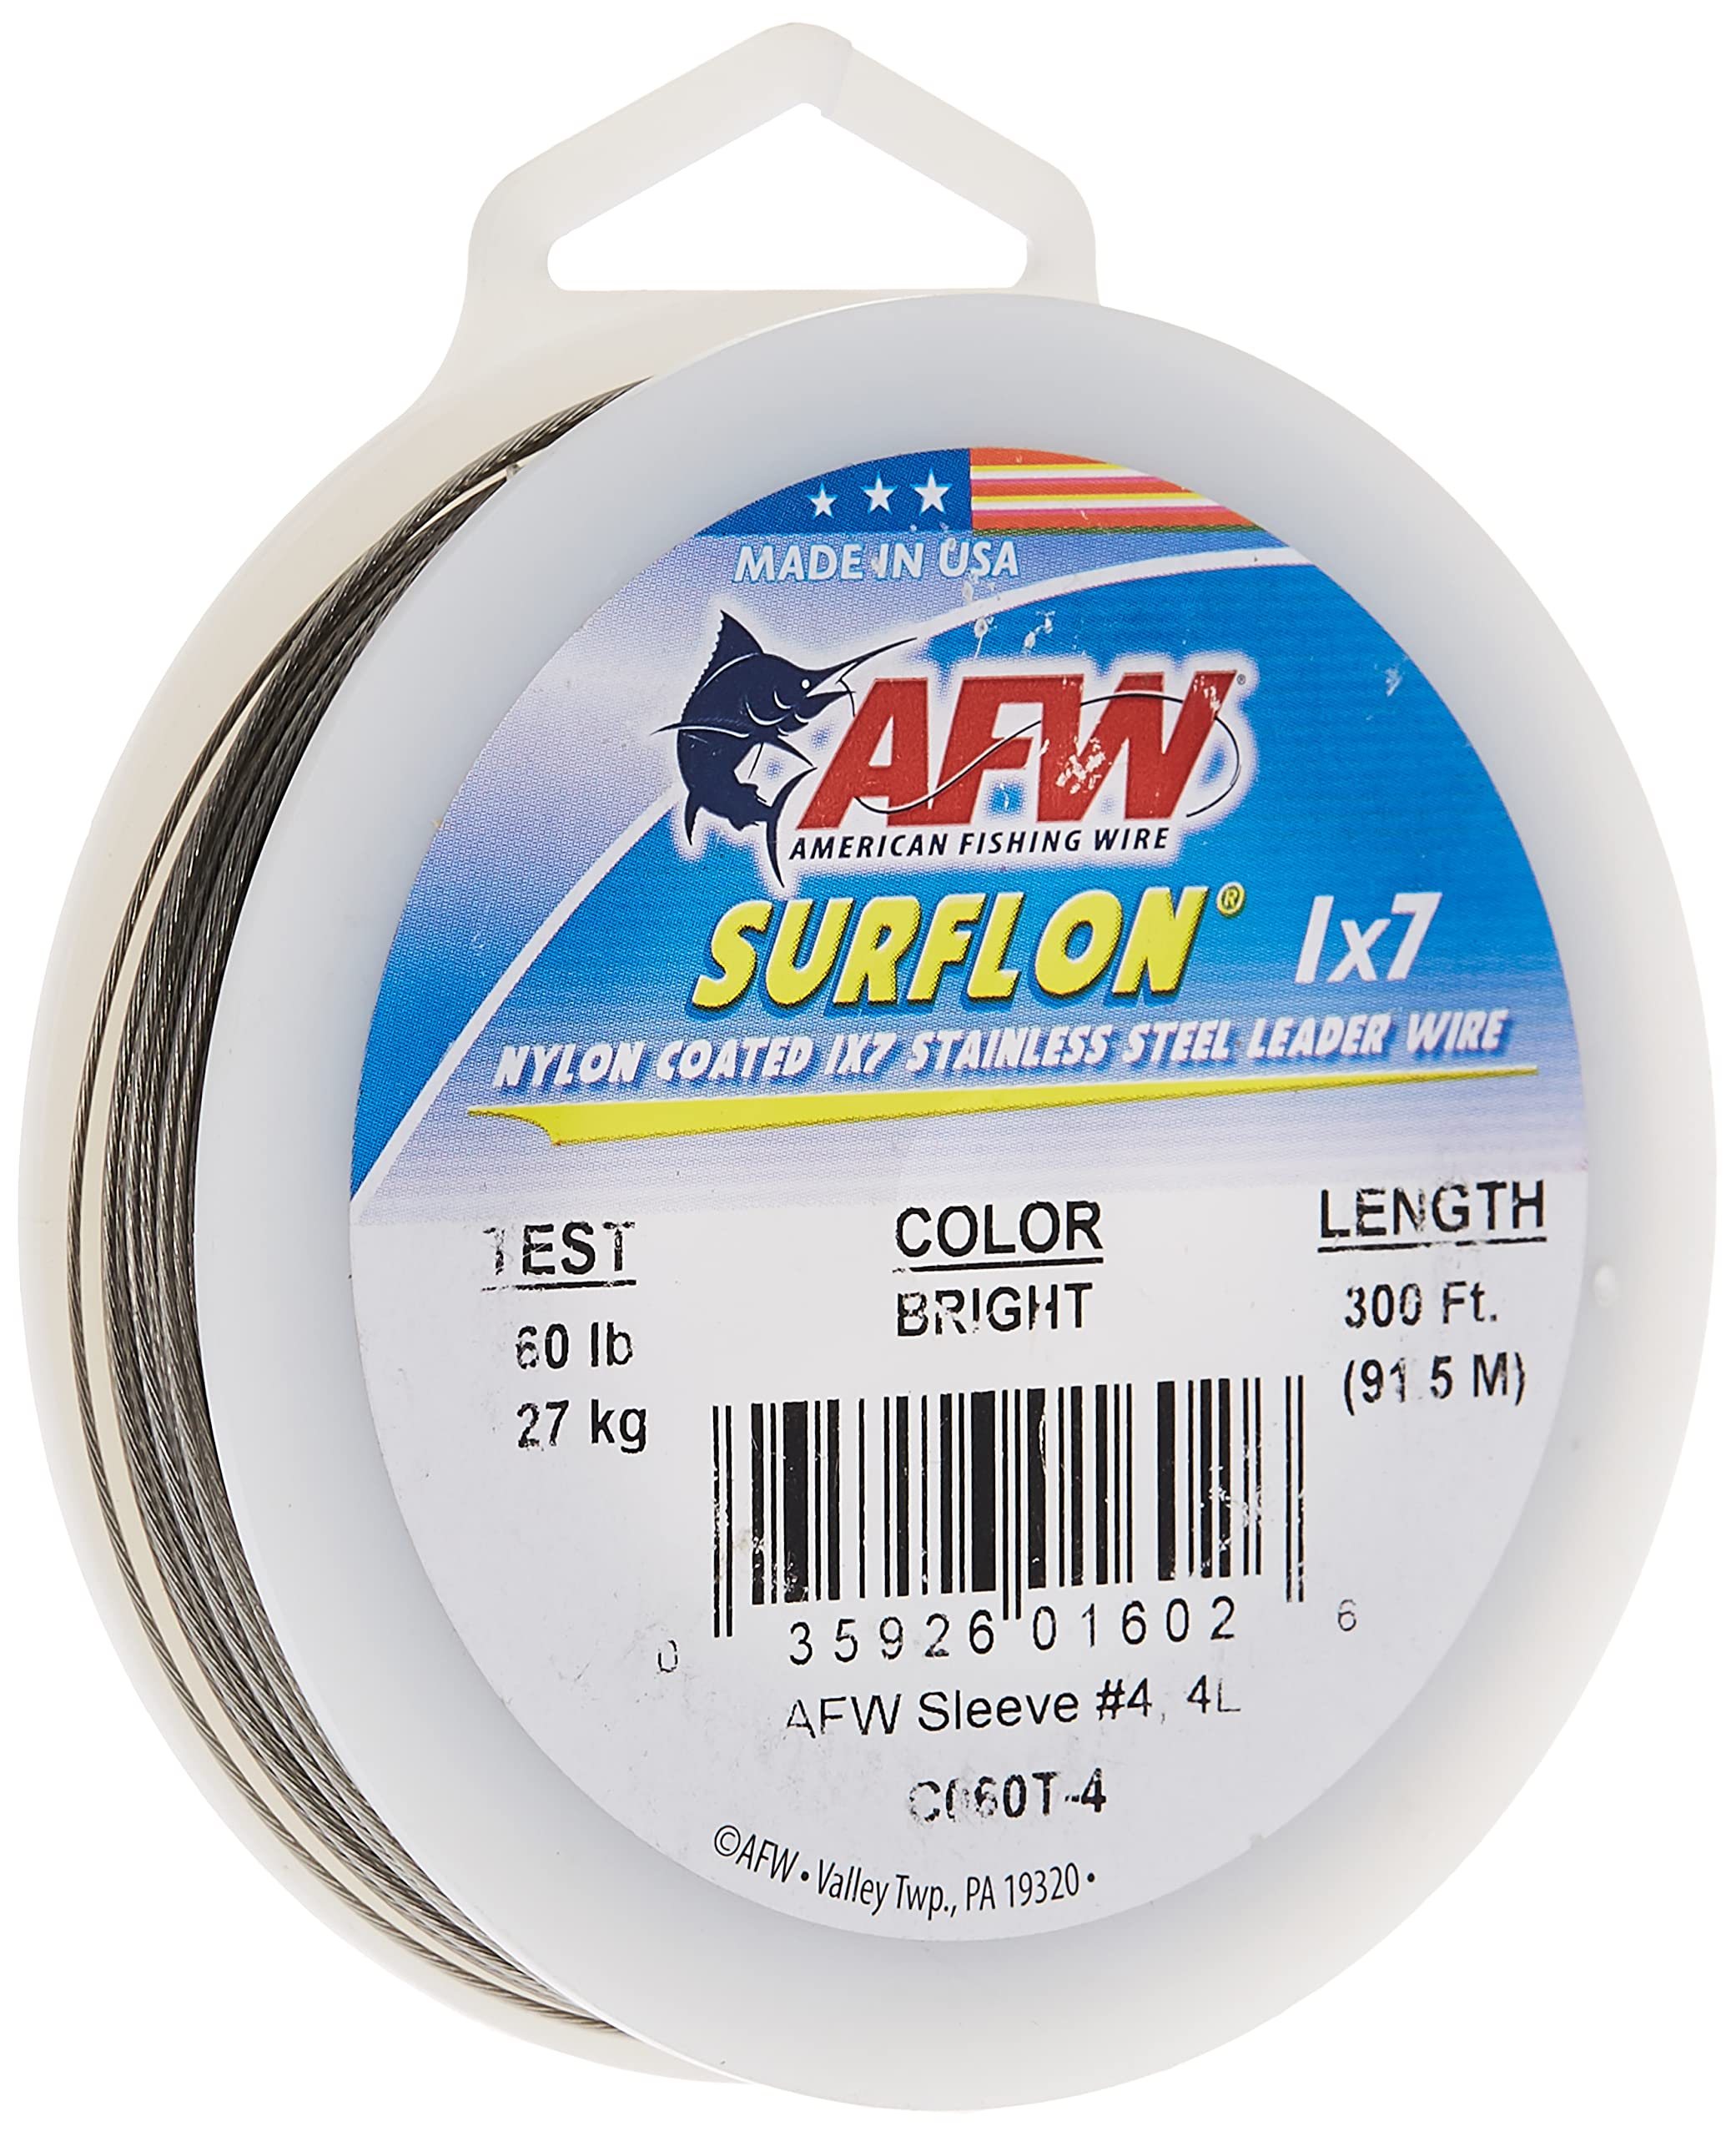 30 ft. American Fishing Wire Surflon Nylon Coated 1x7 Stainless Steel Leader Wire $3.86 + Free Shipw/Prime